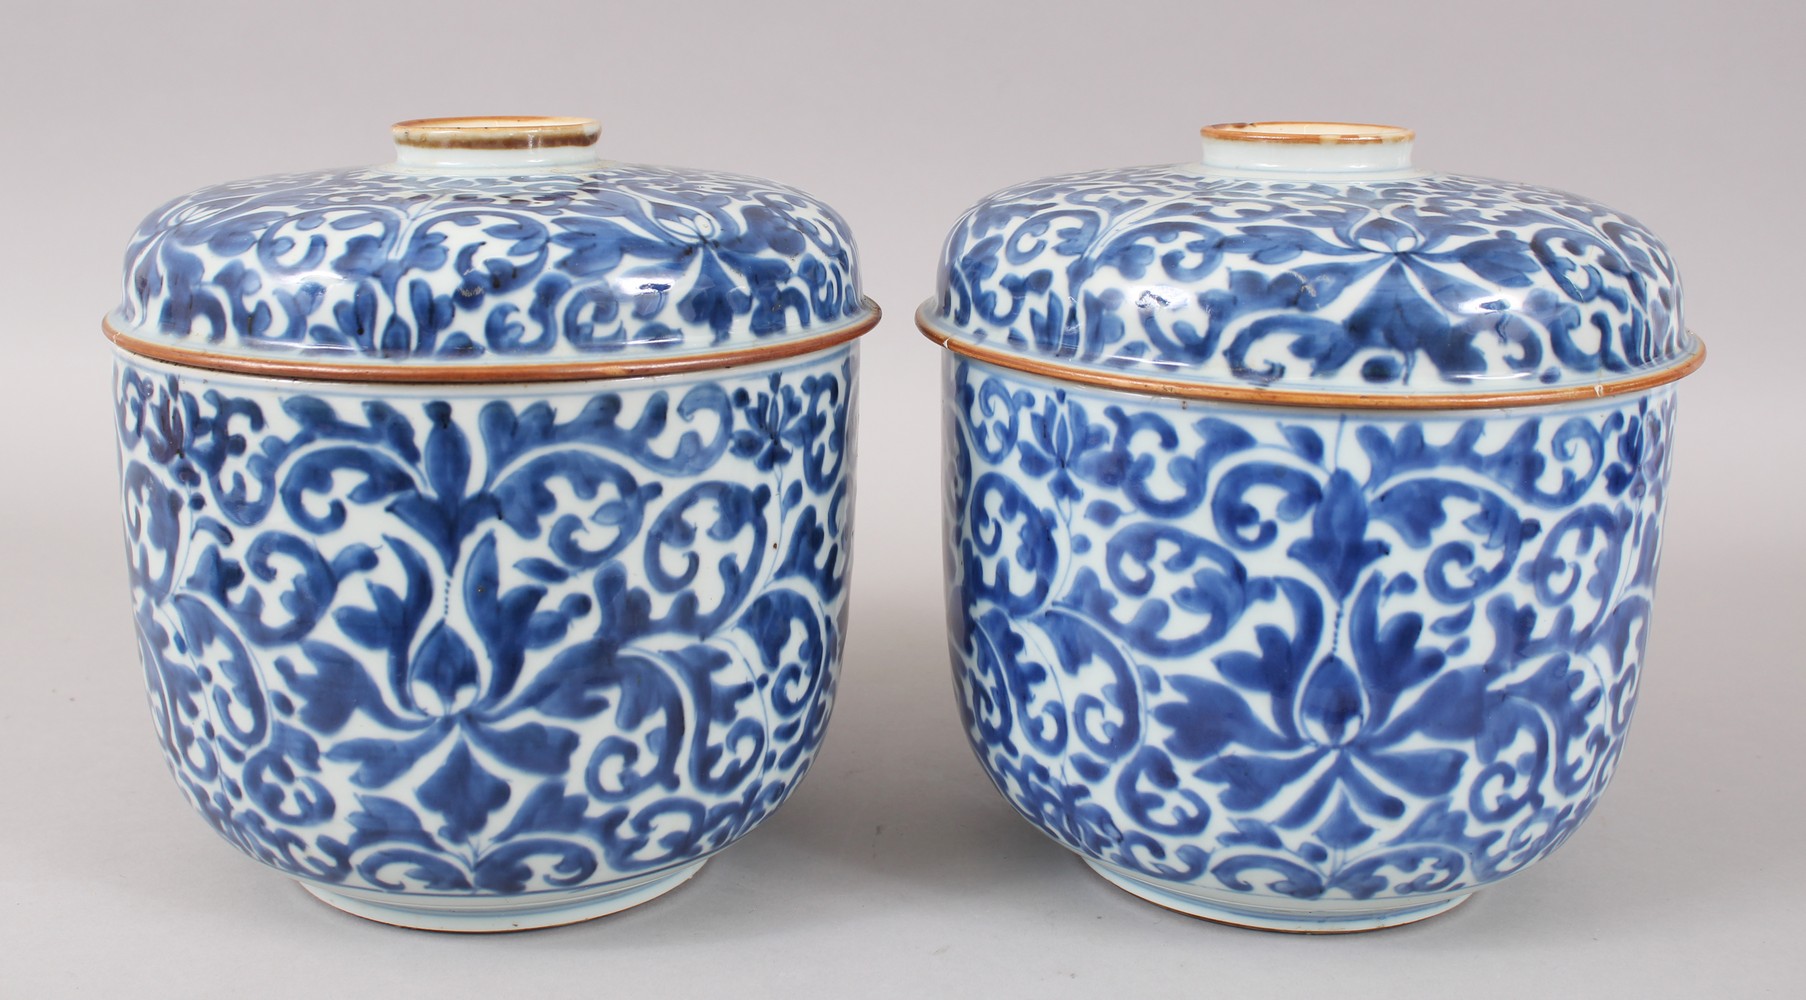 A GOOD PAIR OF QIANLONG CHINESE BLUE AND WHITE PORCELAIN BOWLS & COVERS, the decoration of formal